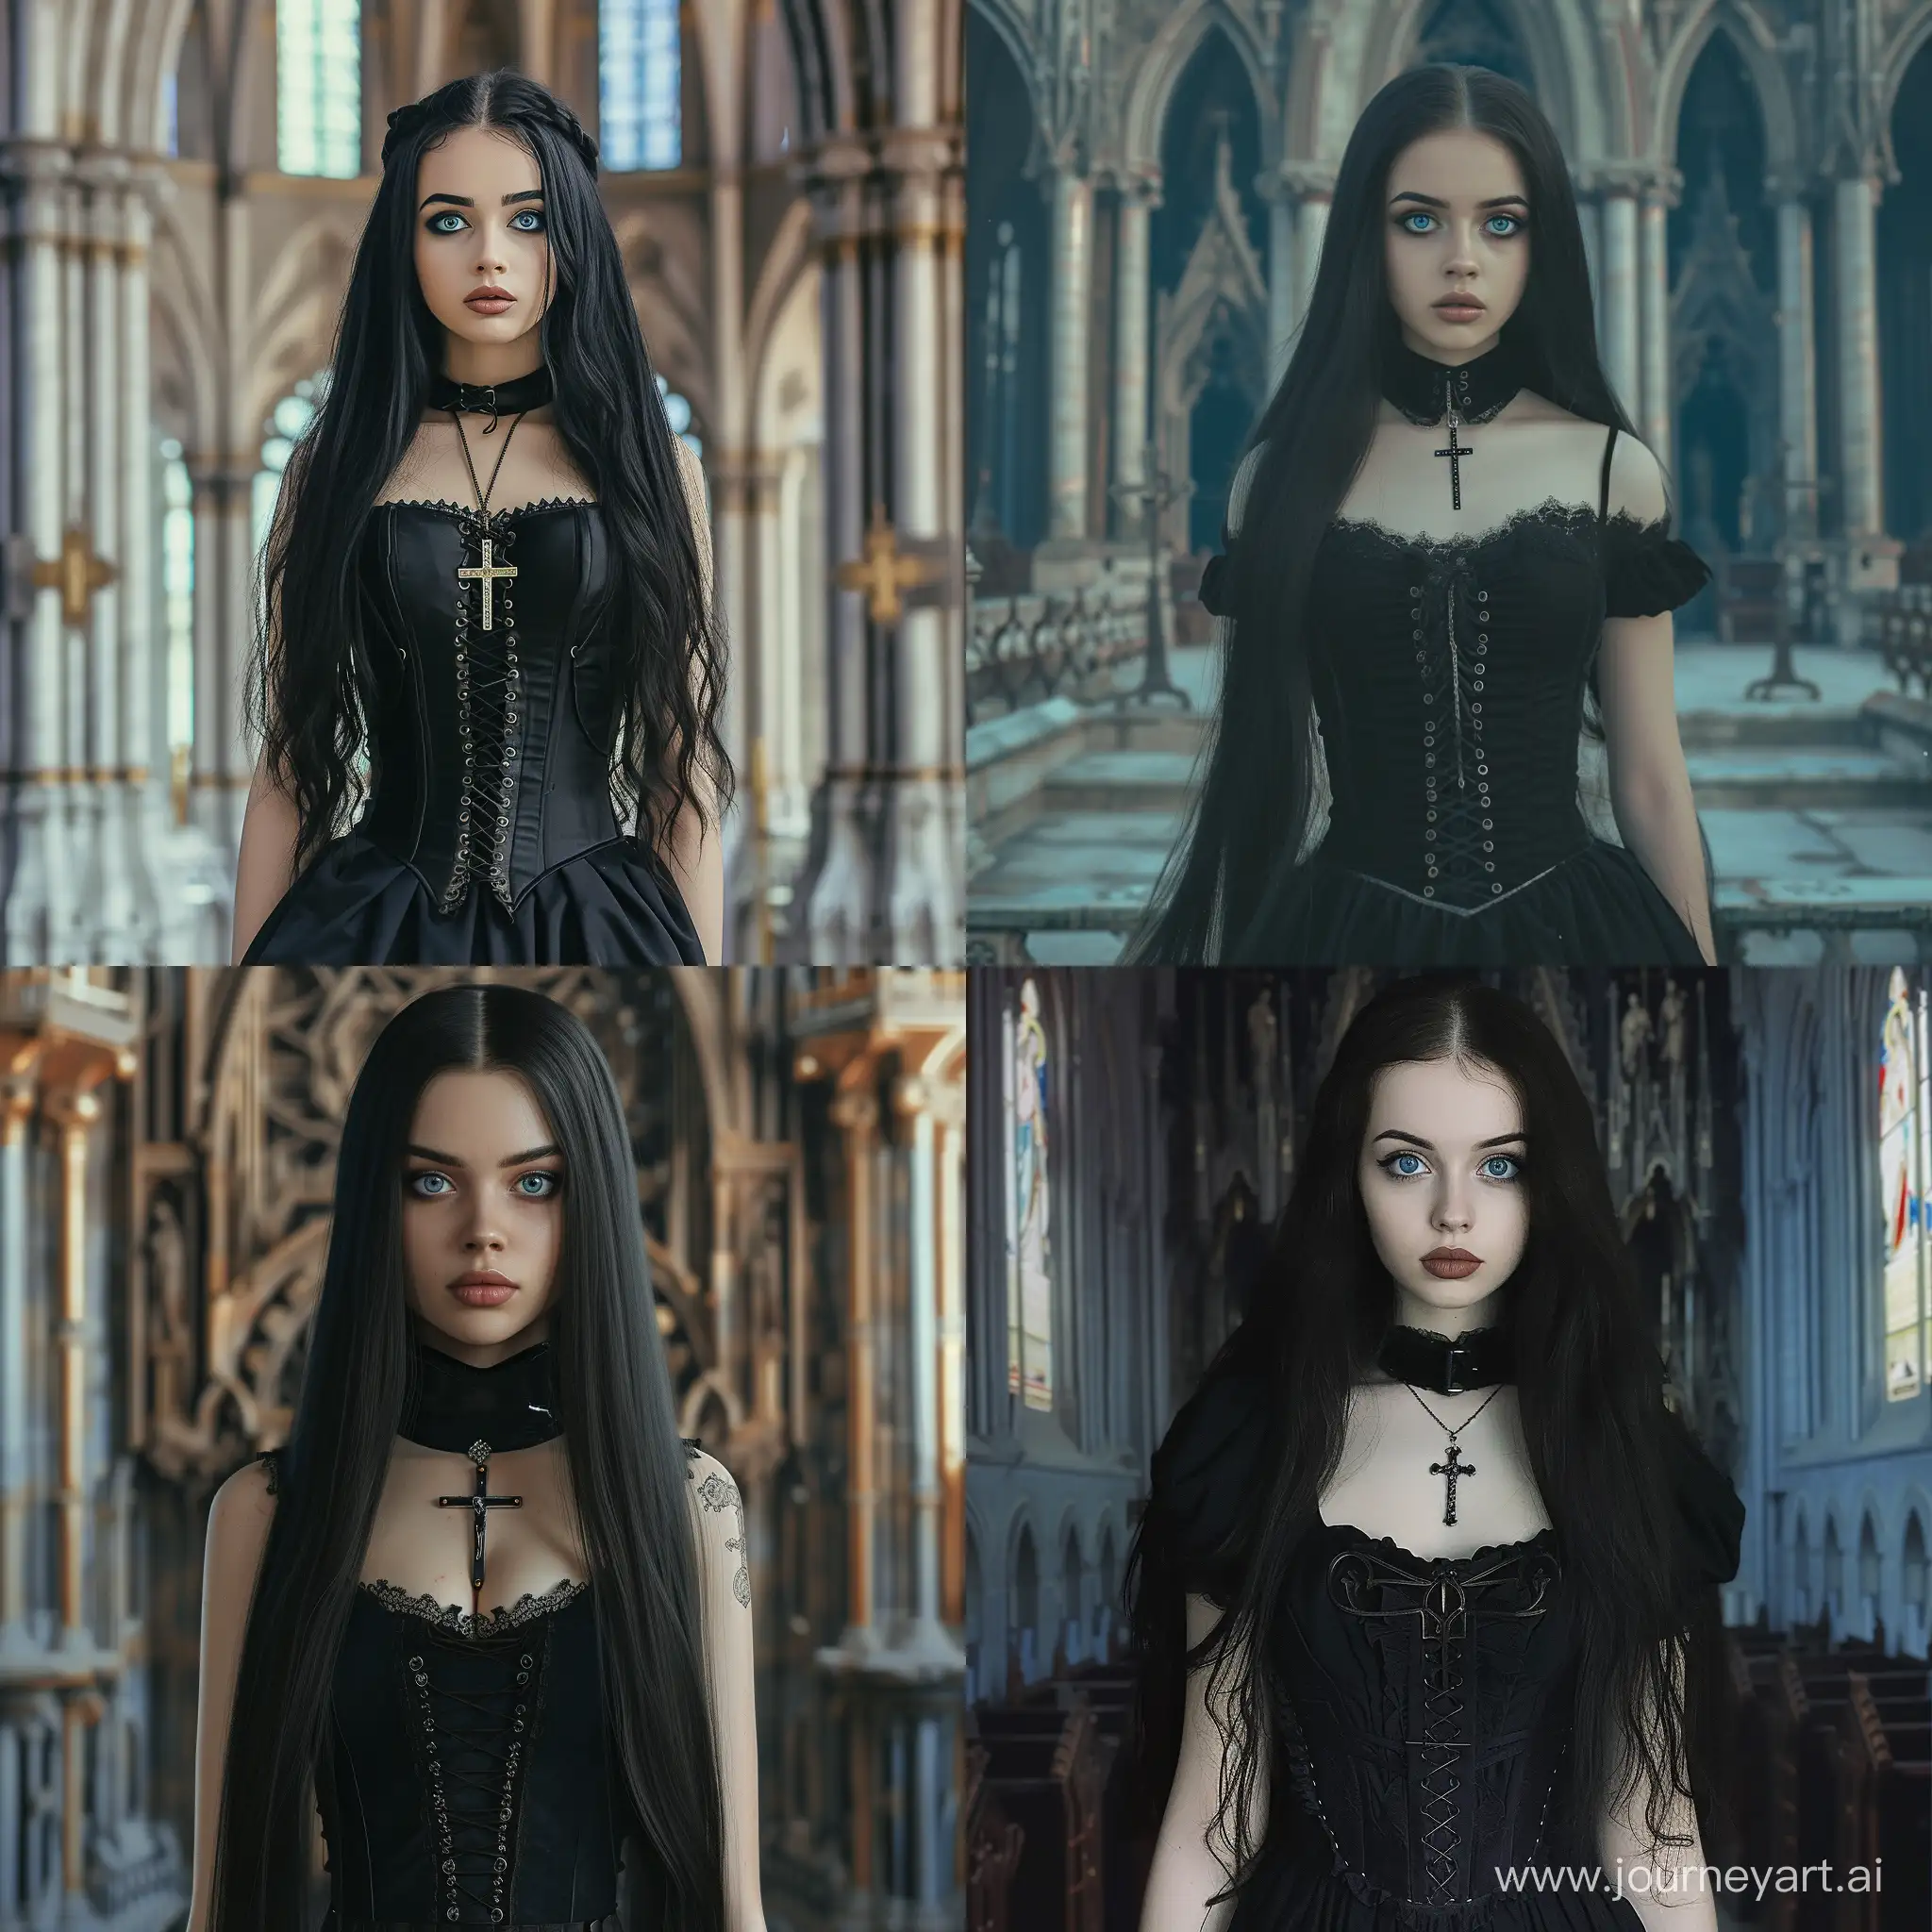 Gothic-Elegance-Mysterious-Woman-in-Black-Dress-at-Catholic-Church